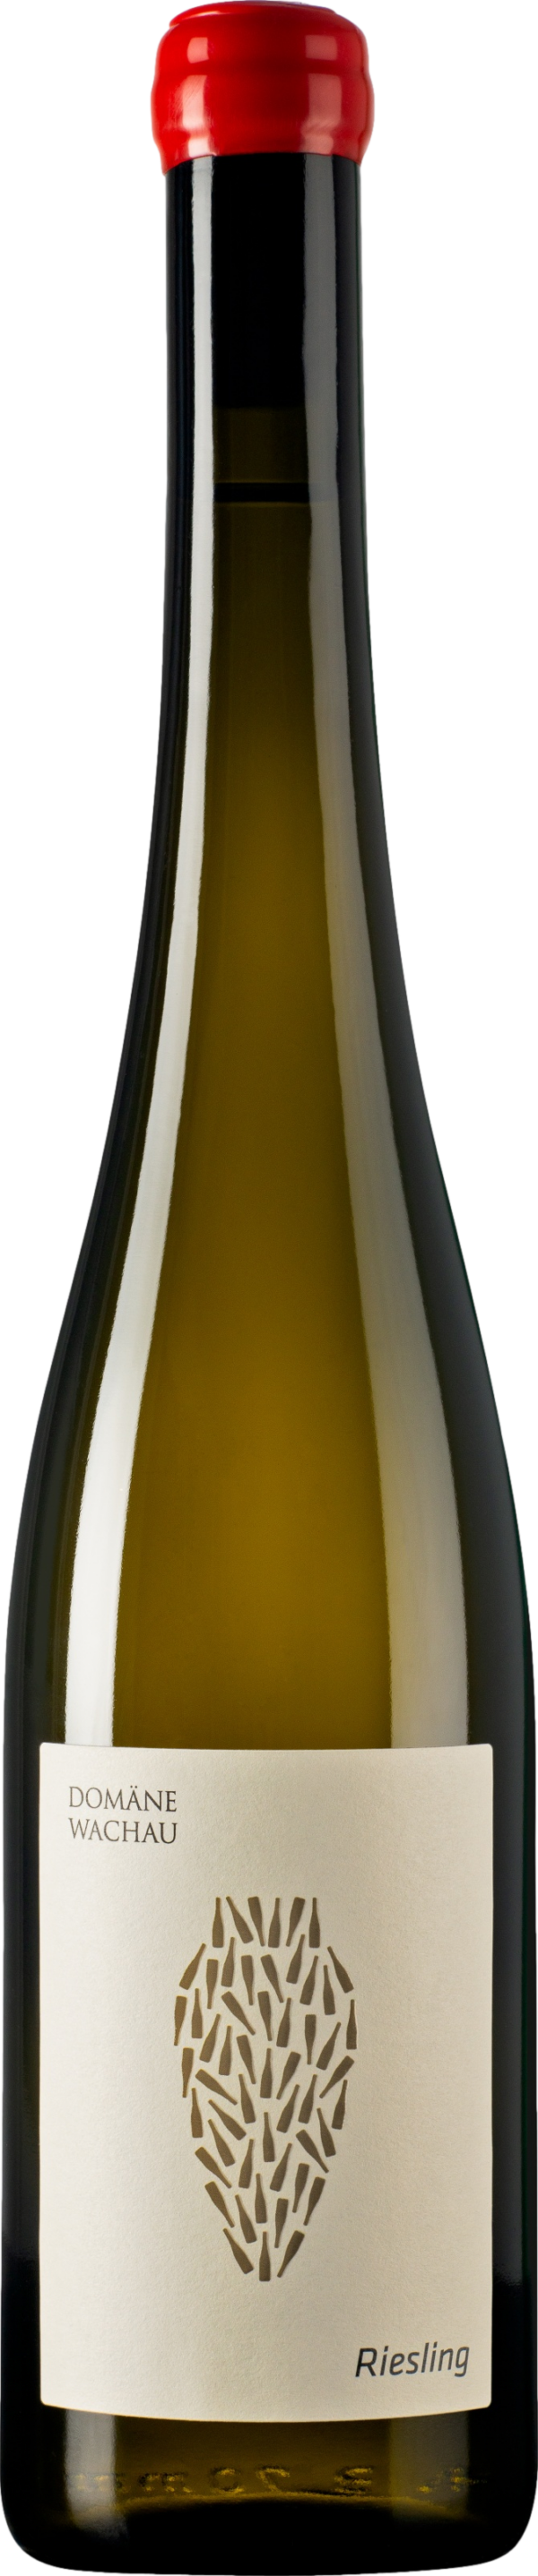 Product image of Domane Wachau Riesling Amphora 2021 from 8wines